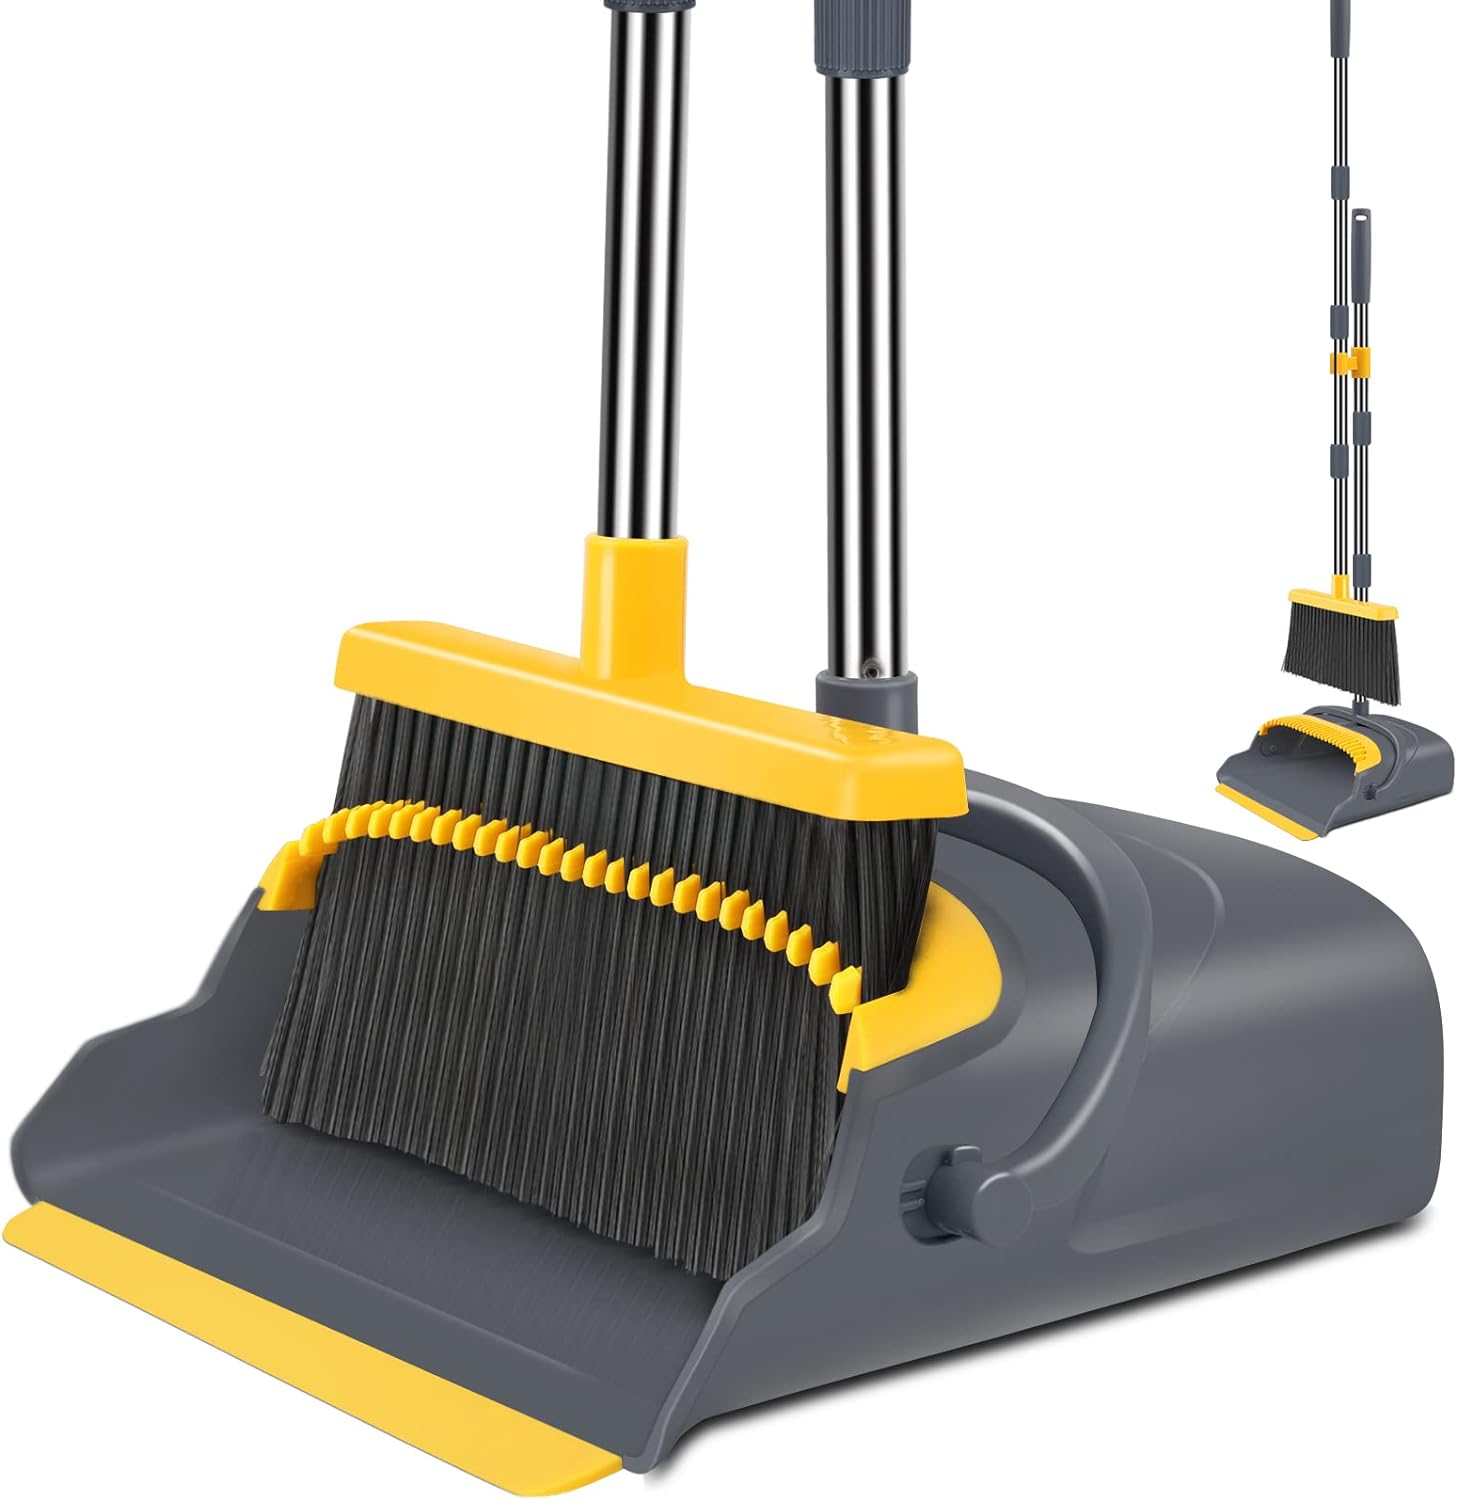 kelamayi Broom and Dustpan Set for Home，Broom and Dustpan Set, Broom Dustpan Set, Broom and Dustpan Combo for Office, Indoor&Outdoor Sweeping, Stand Up Broom and Dustpan (Gray&Yellow)